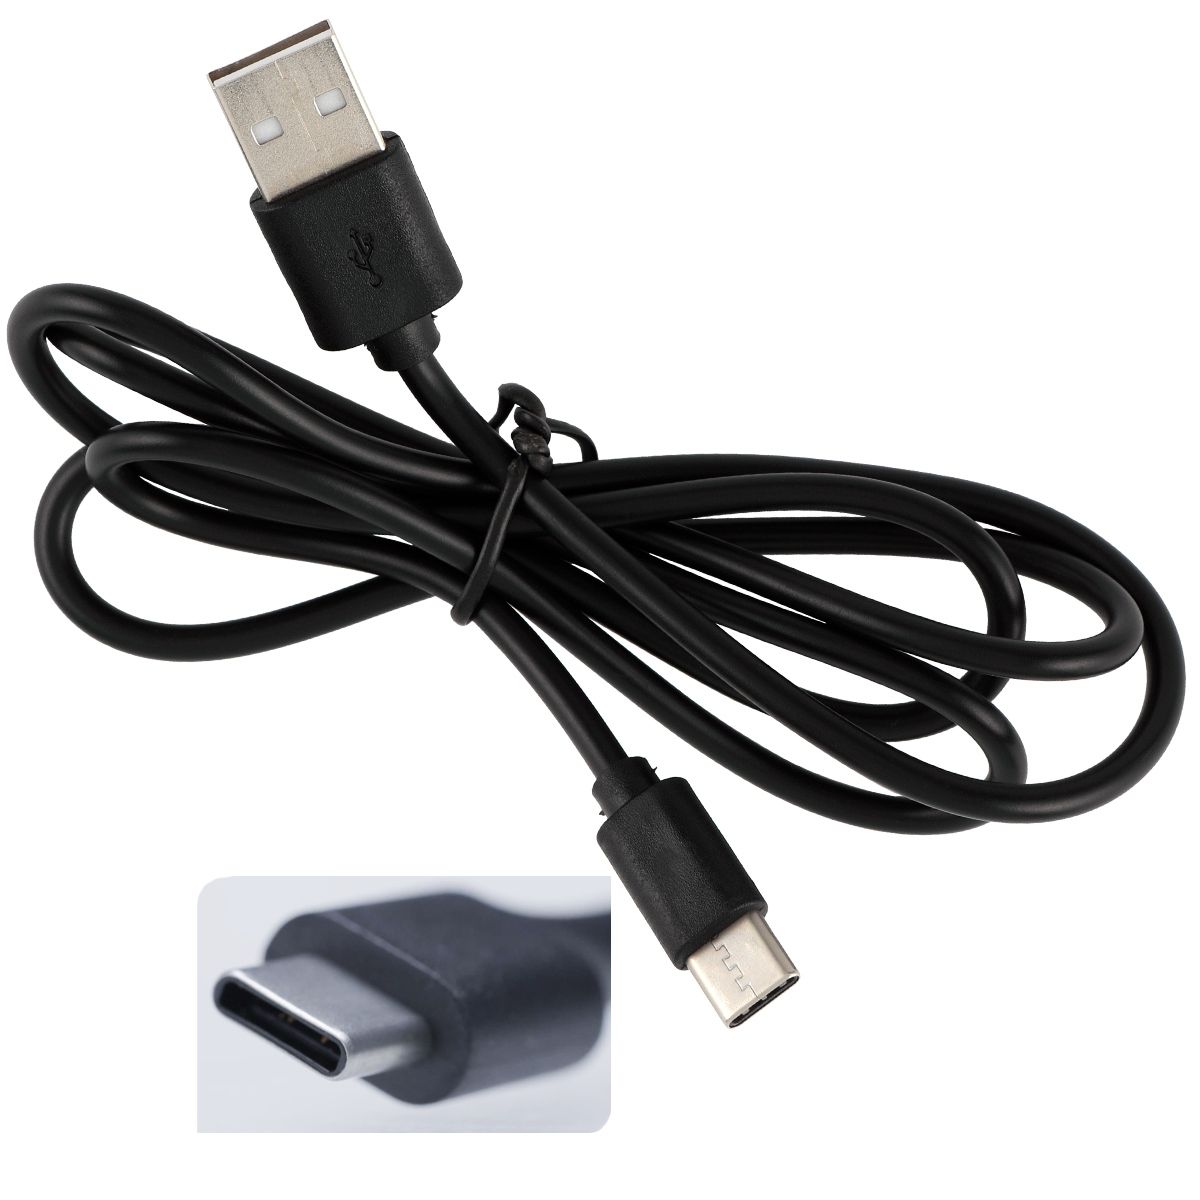 USB-C Cable included